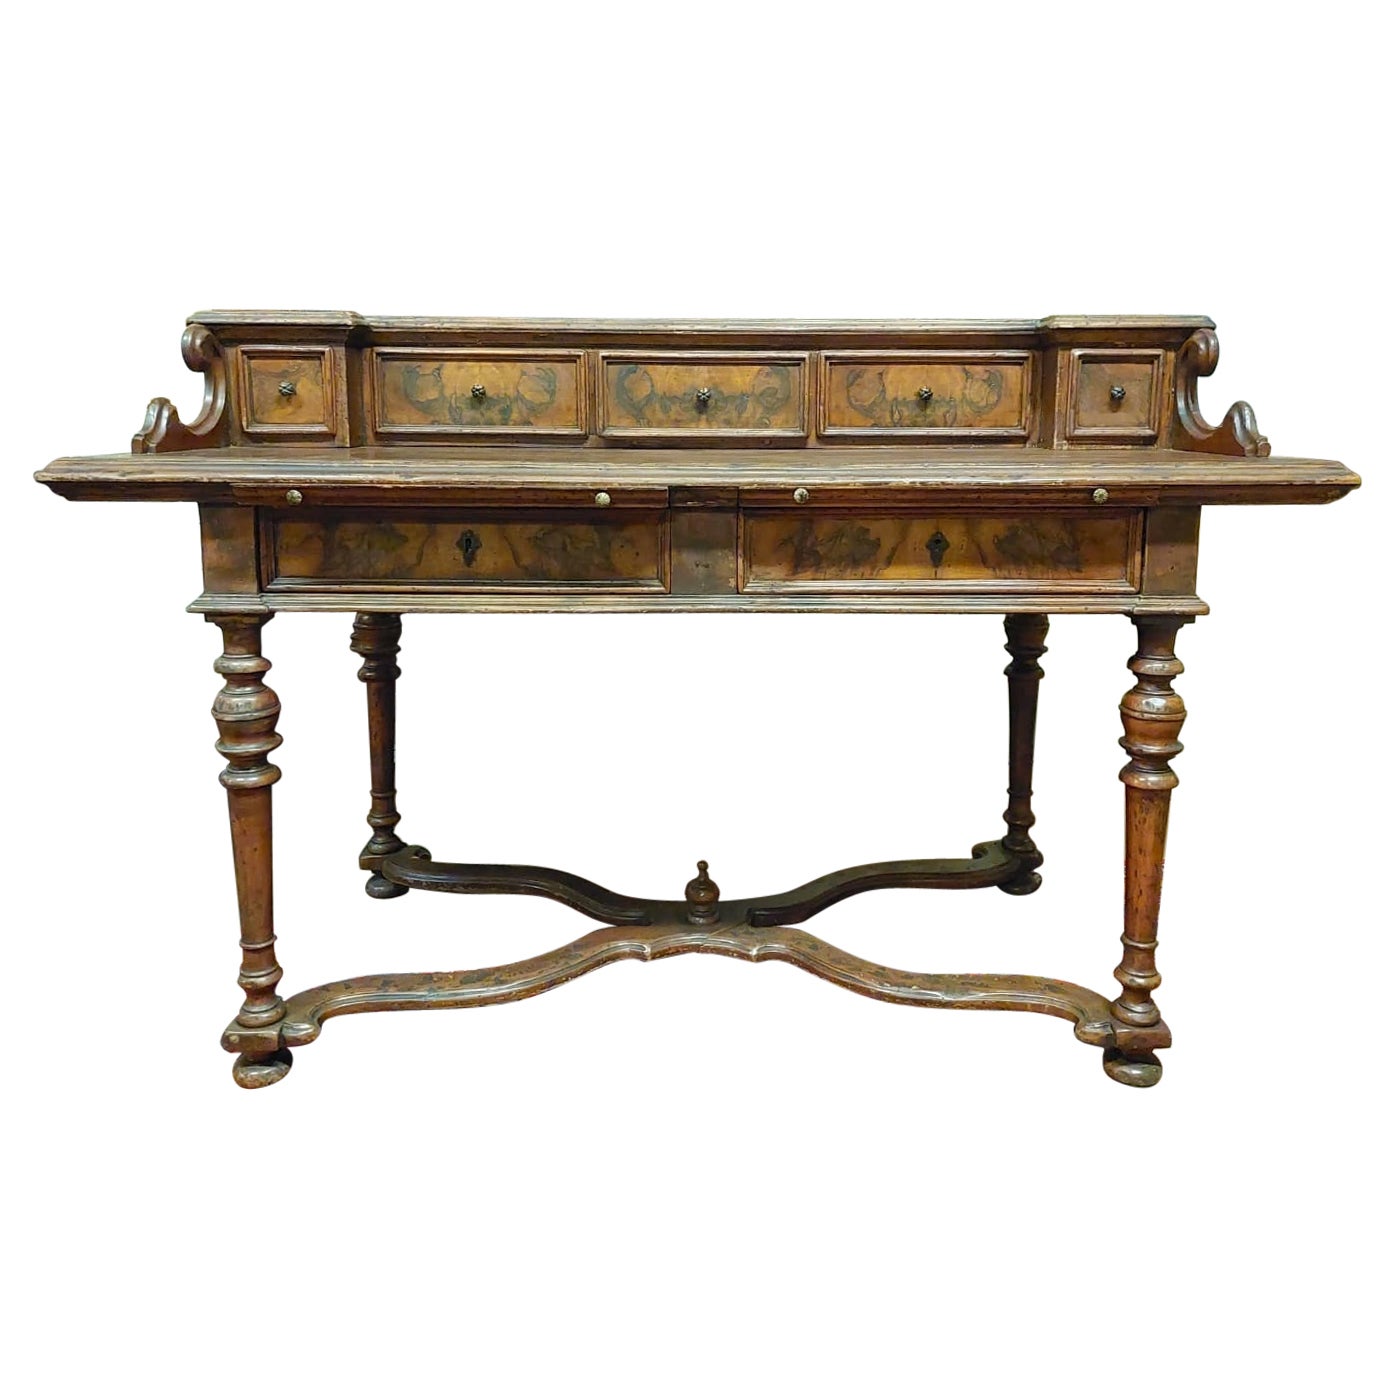 Antique Writing Table with Drawers, Walnut and Briar, 19th Century Naples, Italy